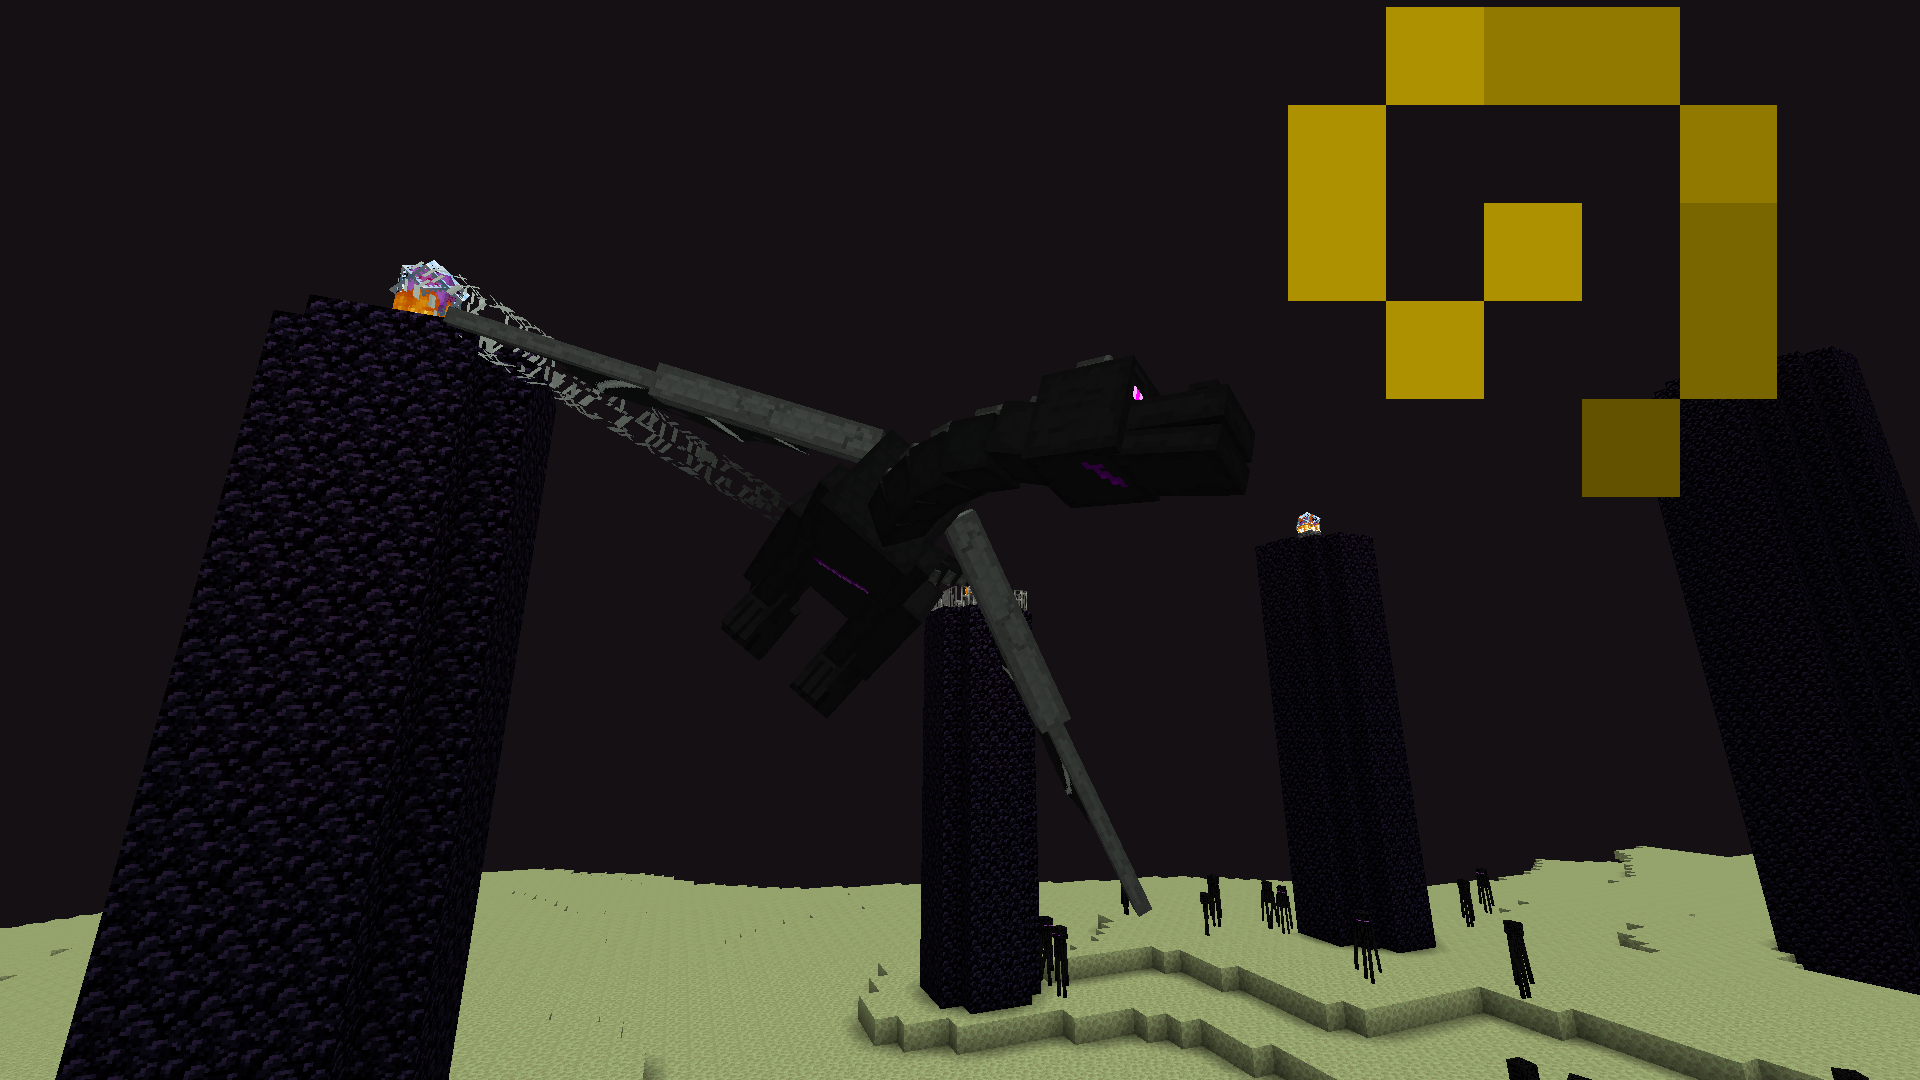 Ender Dragon just before phase two